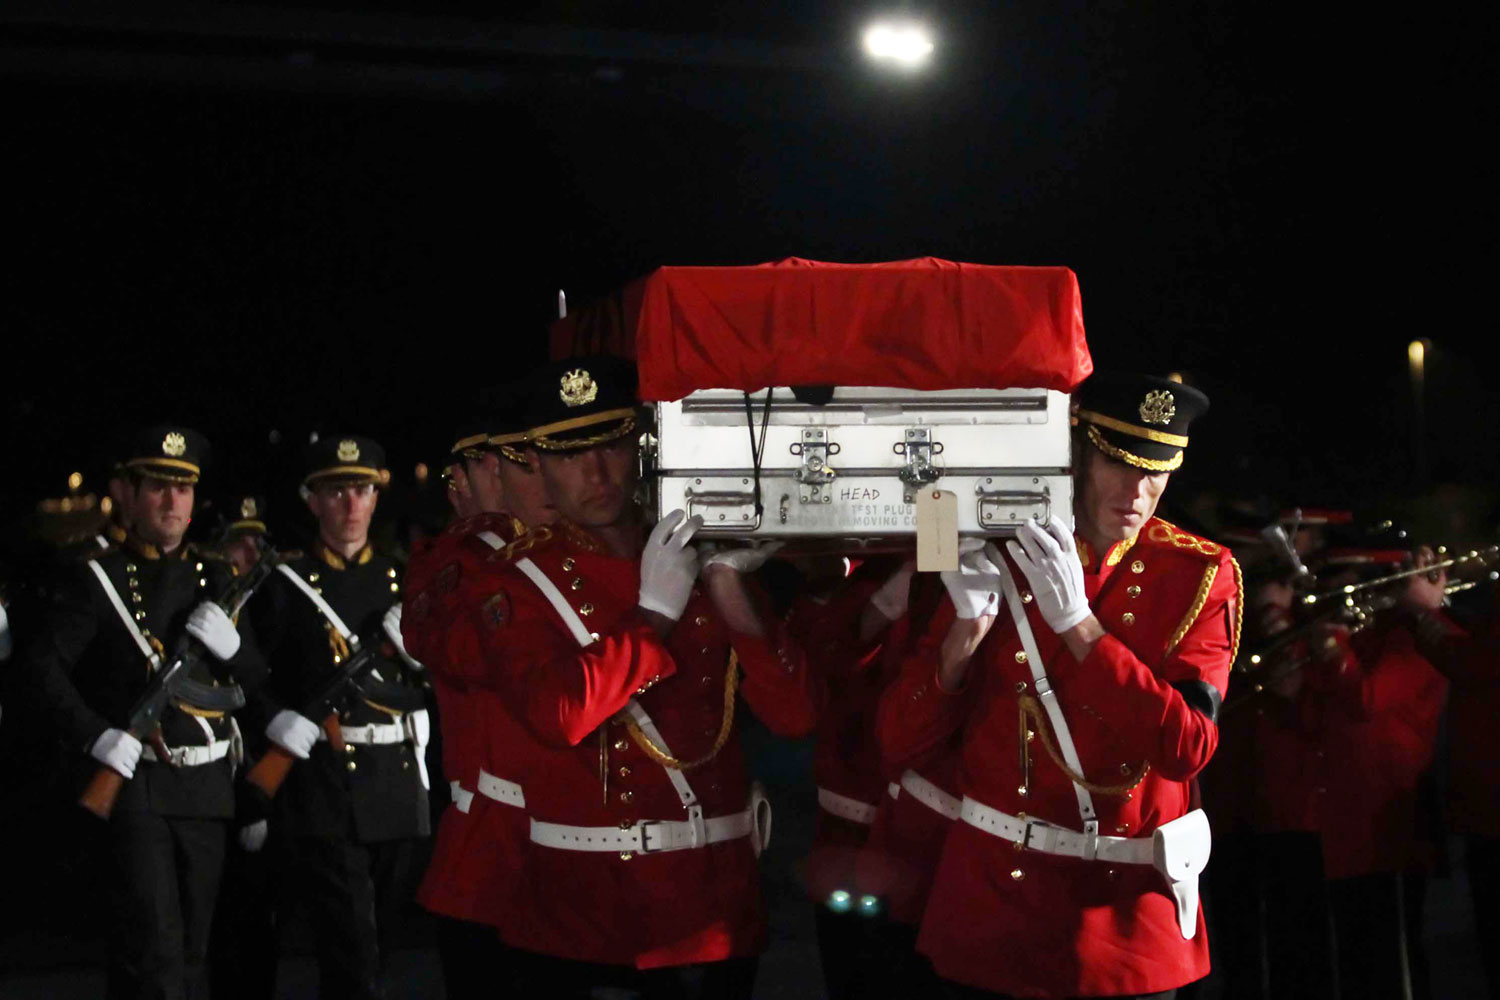 Feb. 24, 2012. Albanian soldiers carry the coffin of Albanian Captain Feti Vogli, 31, as it arrives at Tirana's Mother Teresa airport. On Feb. 20, Afghan gunmen clad in police uniforms opened fire on NATO troops in southern Afghanistan, killing Vogli and injuring two other foreign soldiers, according to Albania's Defense Ministry.